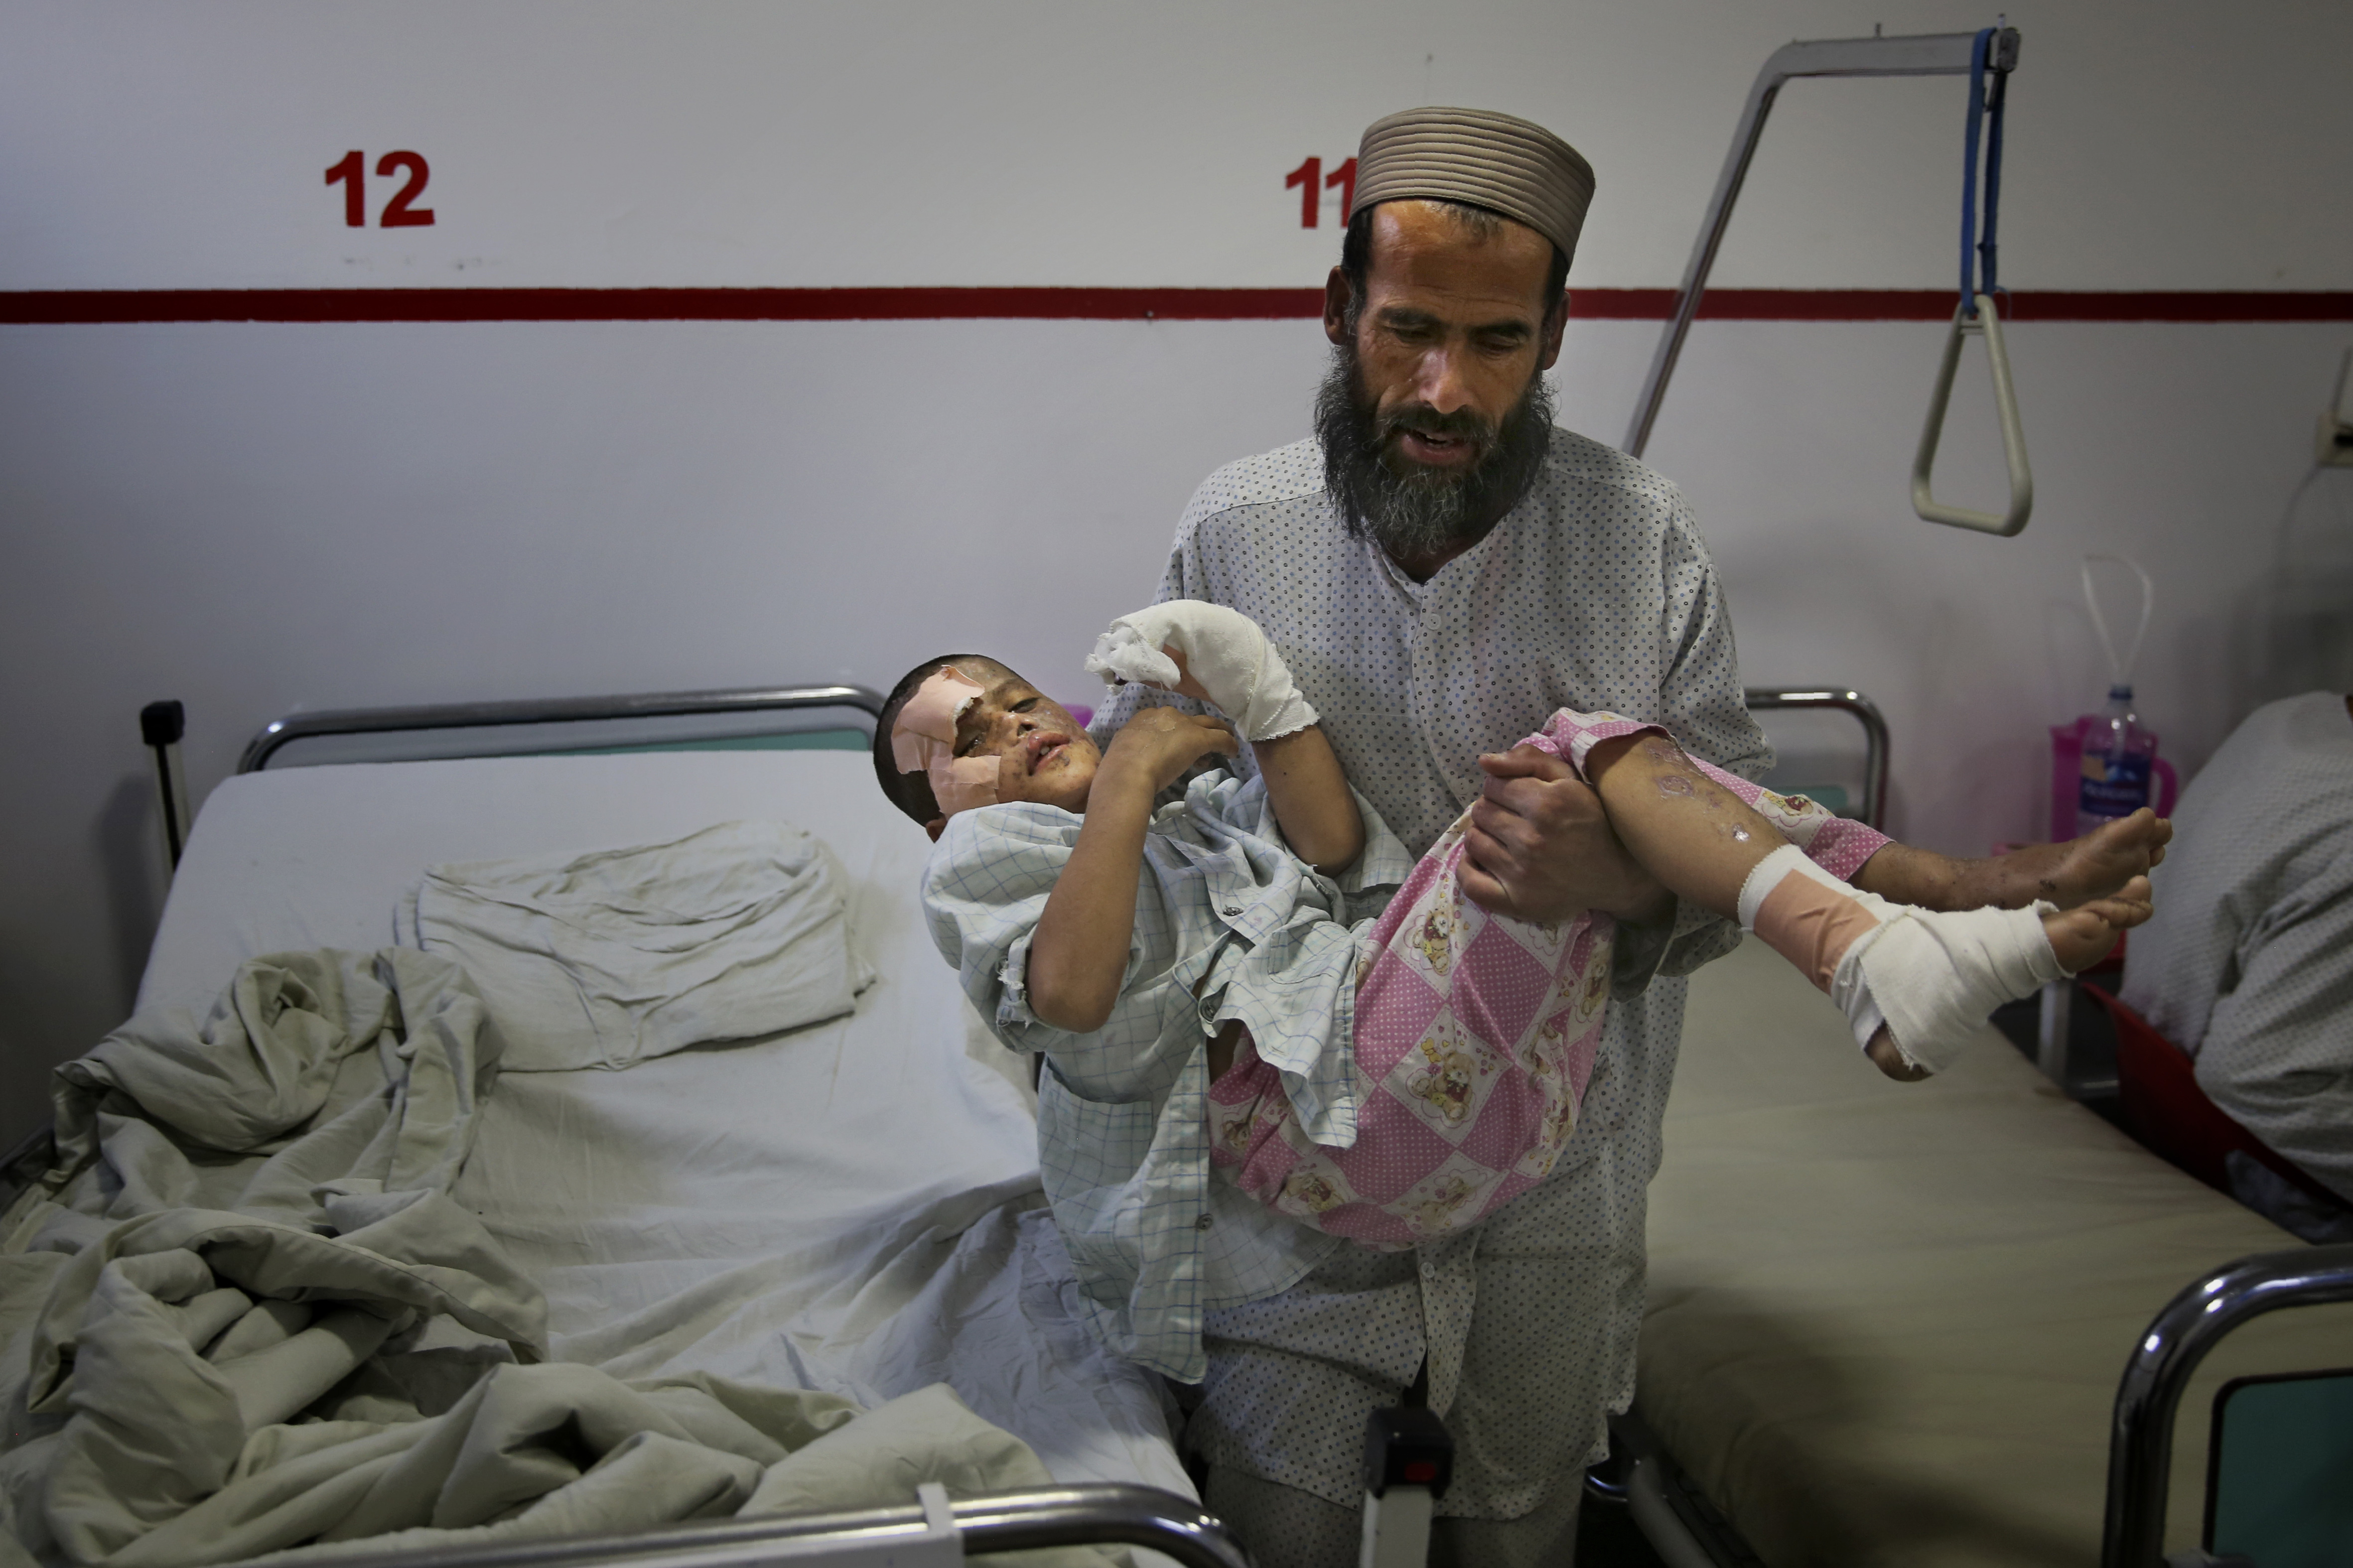 In this Thursday, Dec. 12, 2019, photo, Ismatullah carries his nine-year-old son Eimal, who has lost his right eye and several fingers on his hands in a landmine blast, for bathroom at Emergency Surgical Center for Civilian War Victims in Kabul, Afghanistan. The total number of children killed or maimed in more than four decades long Afghan war is not known. But, with a population where close to 50% are under the age of 20, the losses among the young is tremendous. (AP Photo/Altaf Qadri)